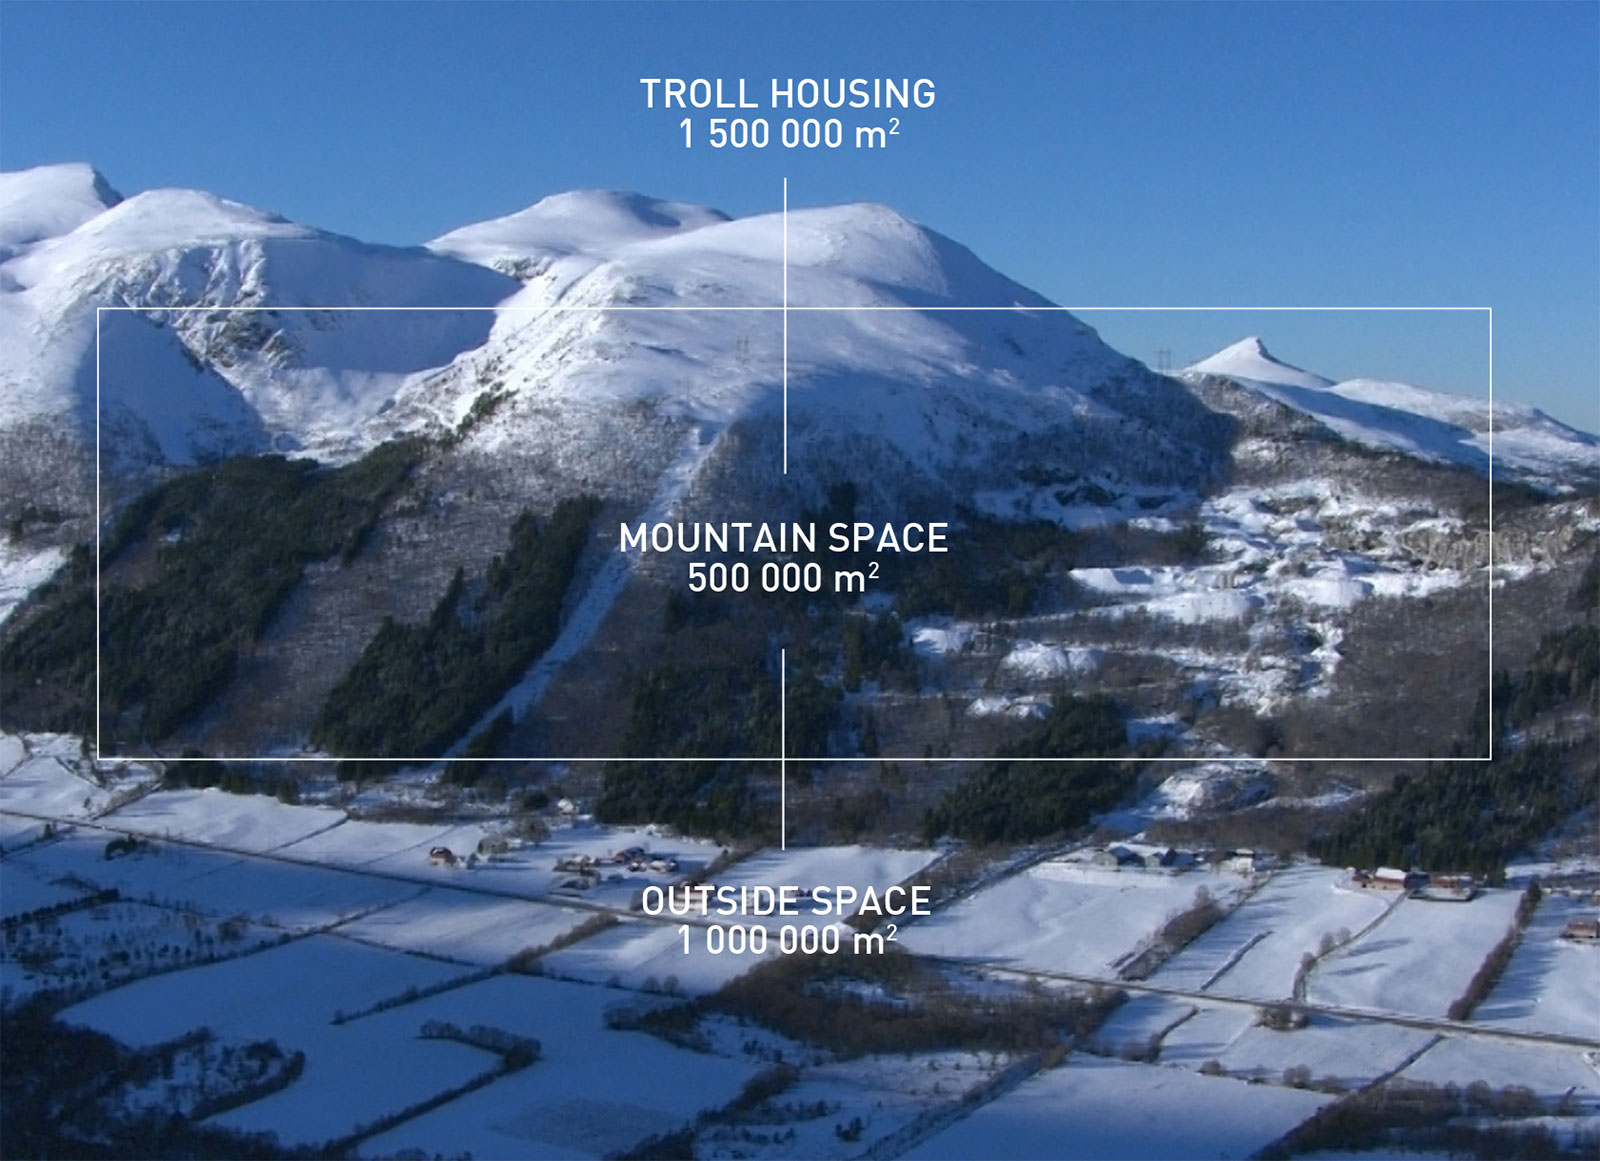 The mountain where the Troll Housing data center is located. Source: Troll Housing